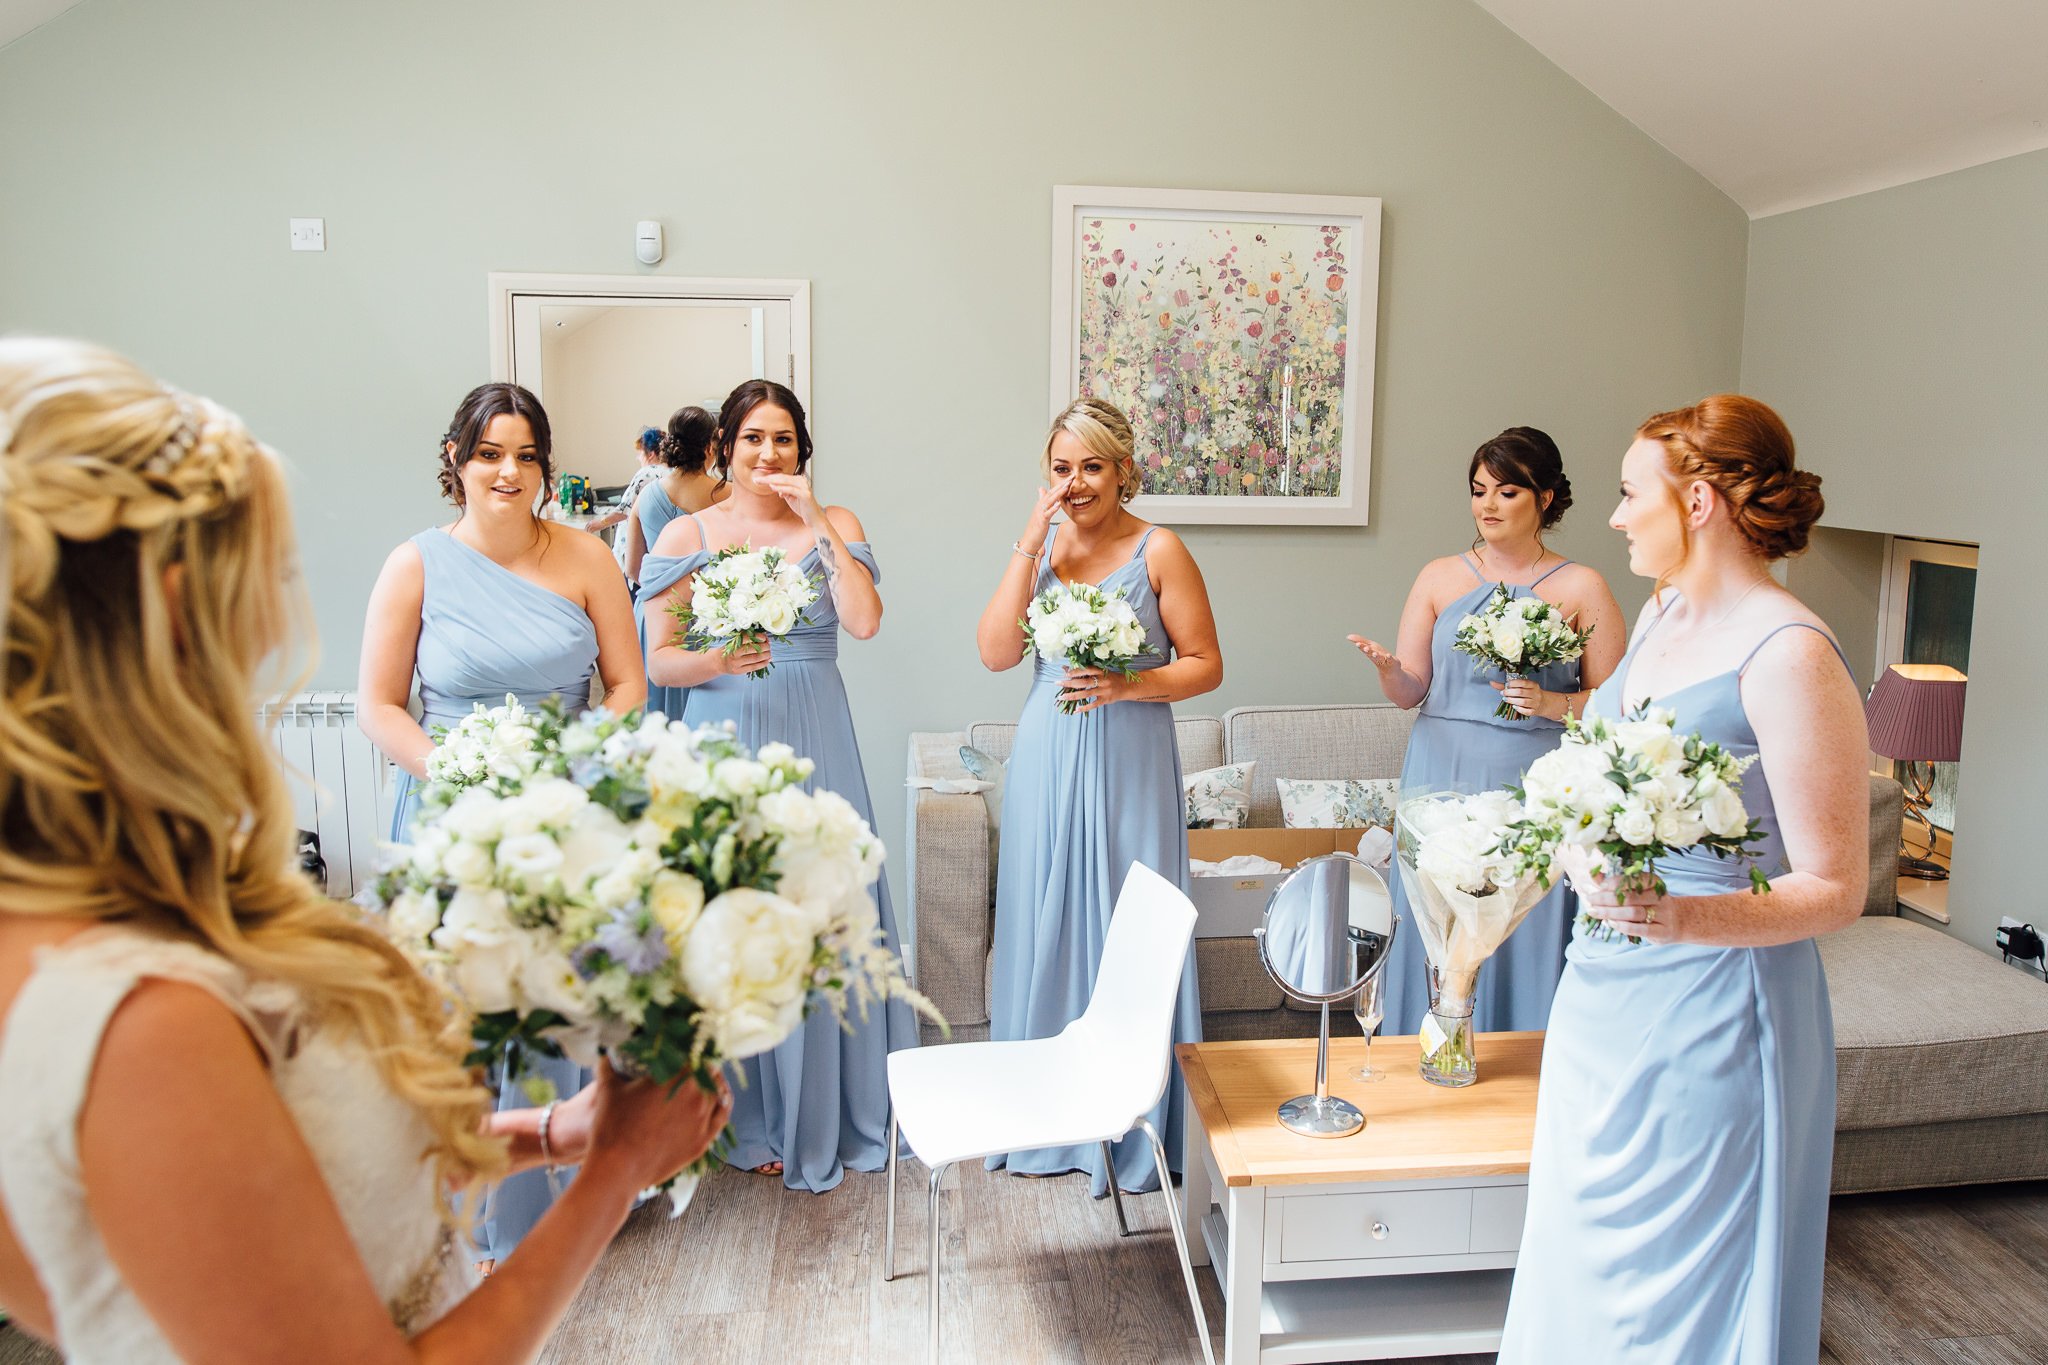  A bridesmaid wipes away a tear at seeing the Bride ready for her wedding day 